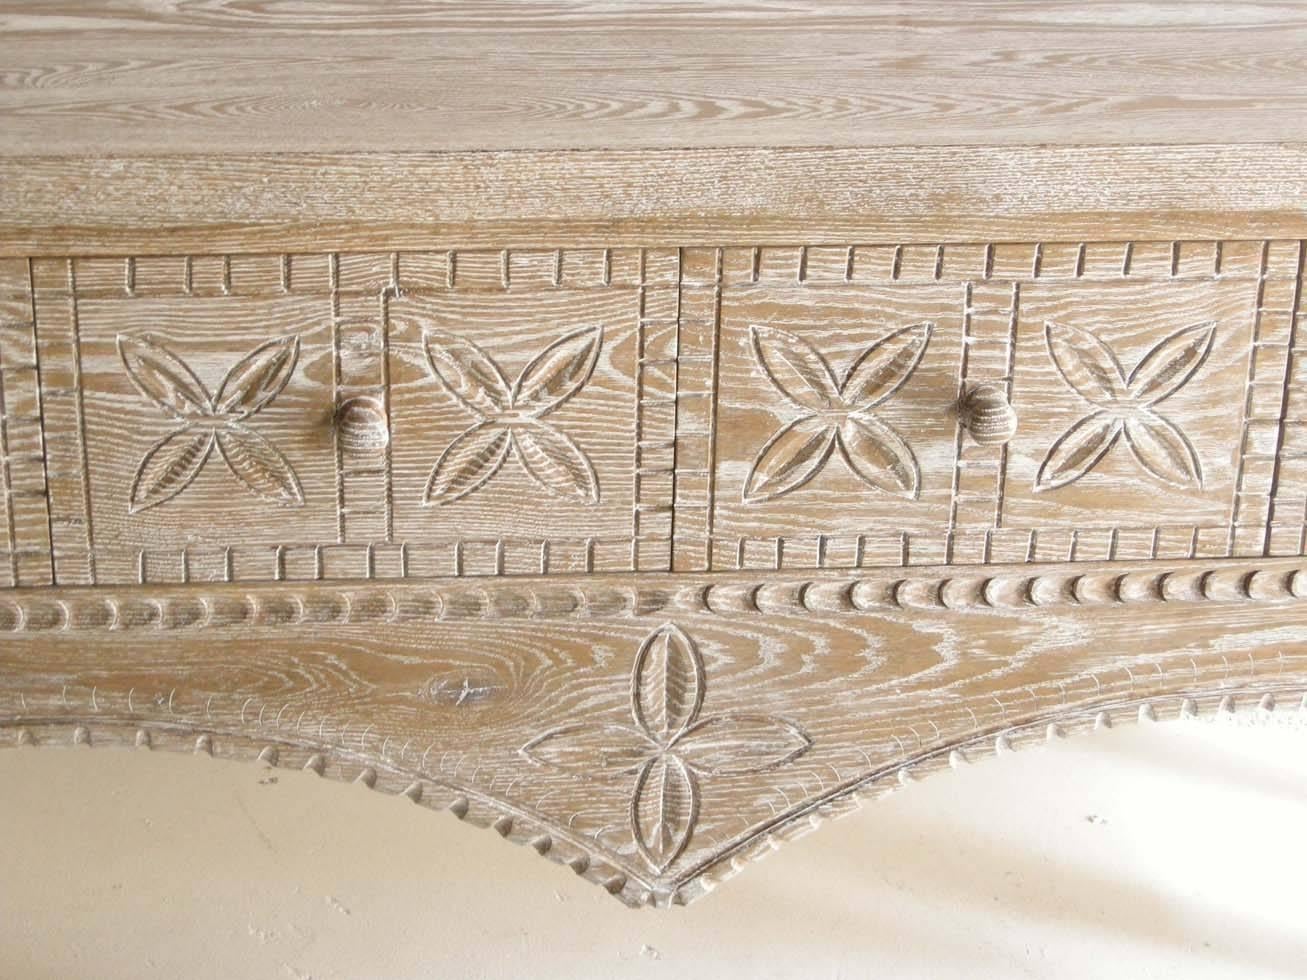 Custom Nahuala console table with intricate carvings and drawers, based on an indigenous Guatemalan Nahuala (animal spirit) table . Available in walnut, oak or mahogany in a variety of colors and finishes. As shown in oak with a ceruse and weathered